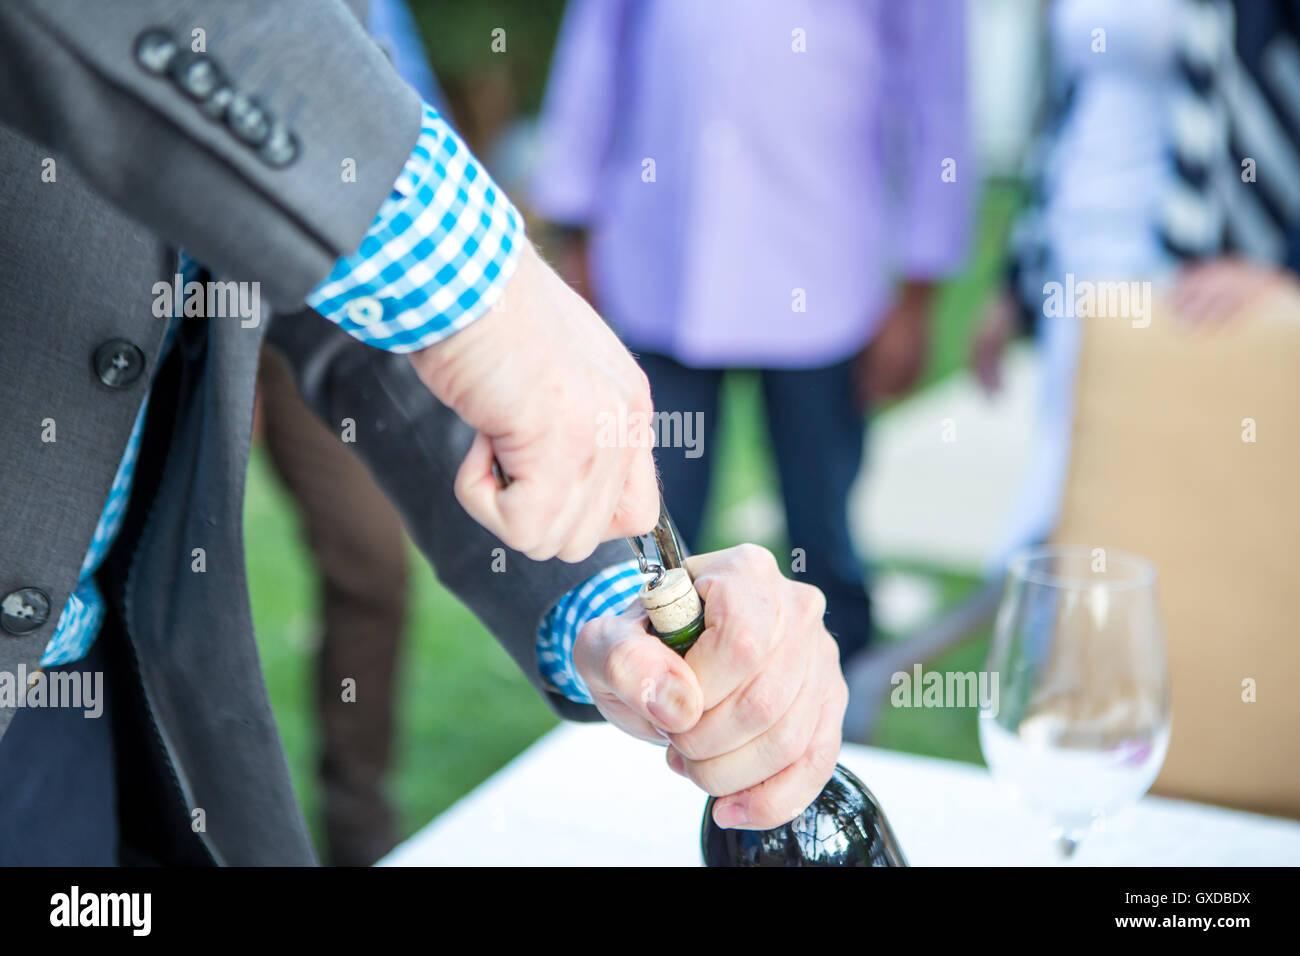 Male hands uncorking wine bottle at garden party table Stock Photo